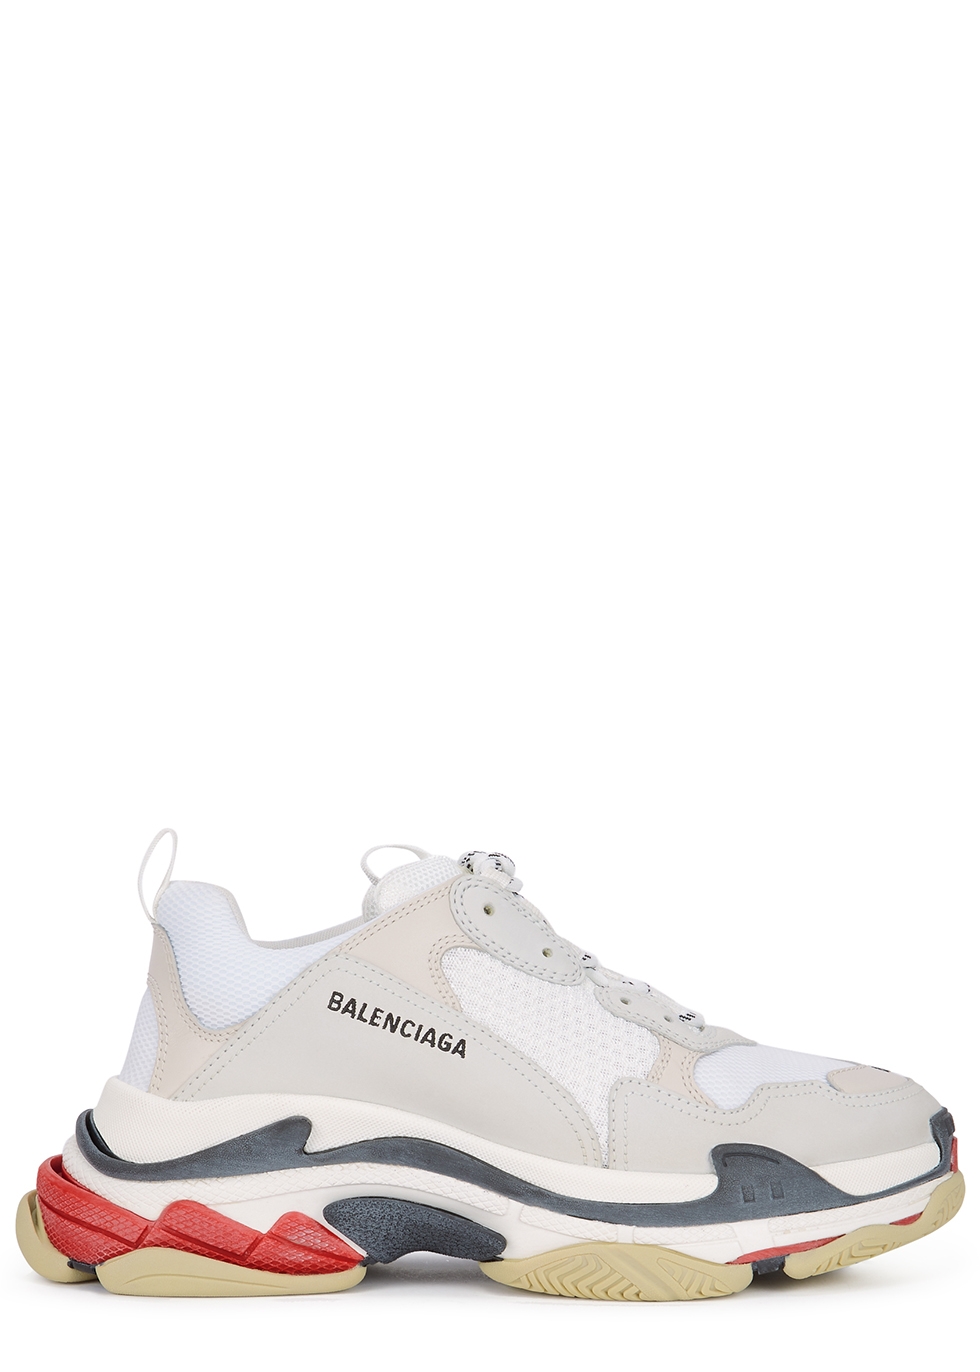 Balenciaga Leather Blue And Grey Triple S Sneakers Lyst